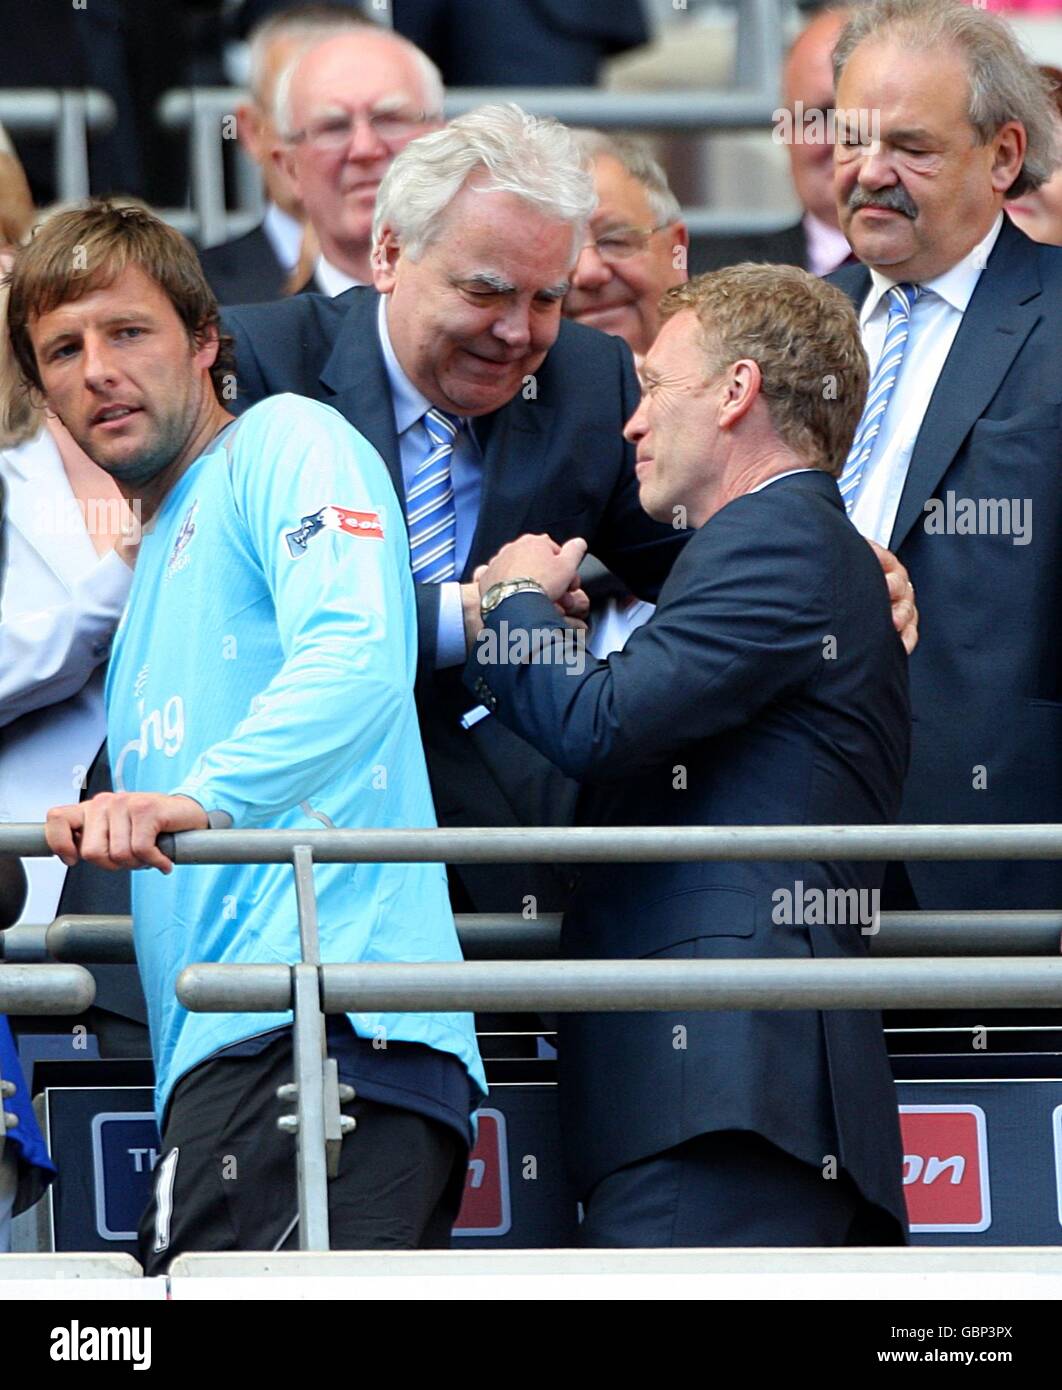 Soccer - FA Cup - Final - Chelsea v Everton - Wembley Stadium. Everton chairman Bill Kenwright gives manager David Moyes a handshake as he collects his losers medal Stock Photo